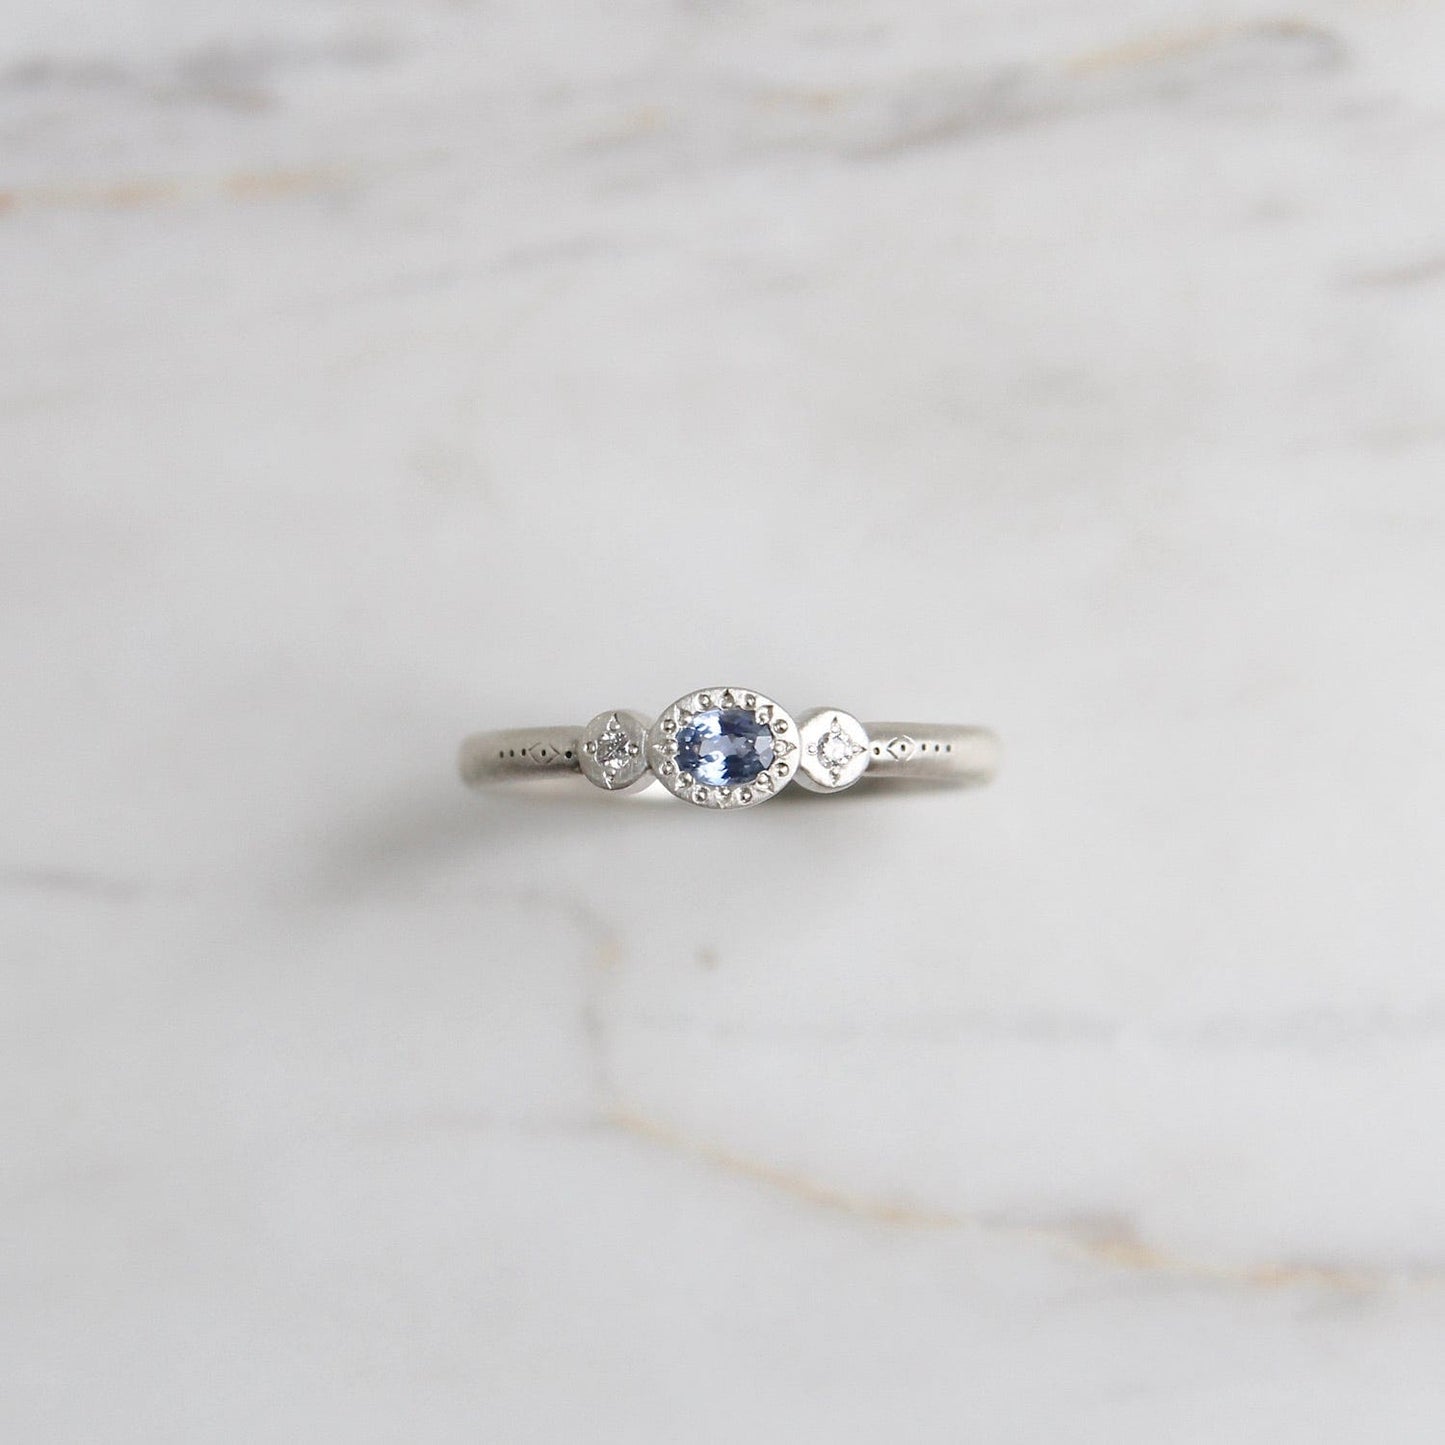 RNG Oval & Round Charm Ring in Sapphire